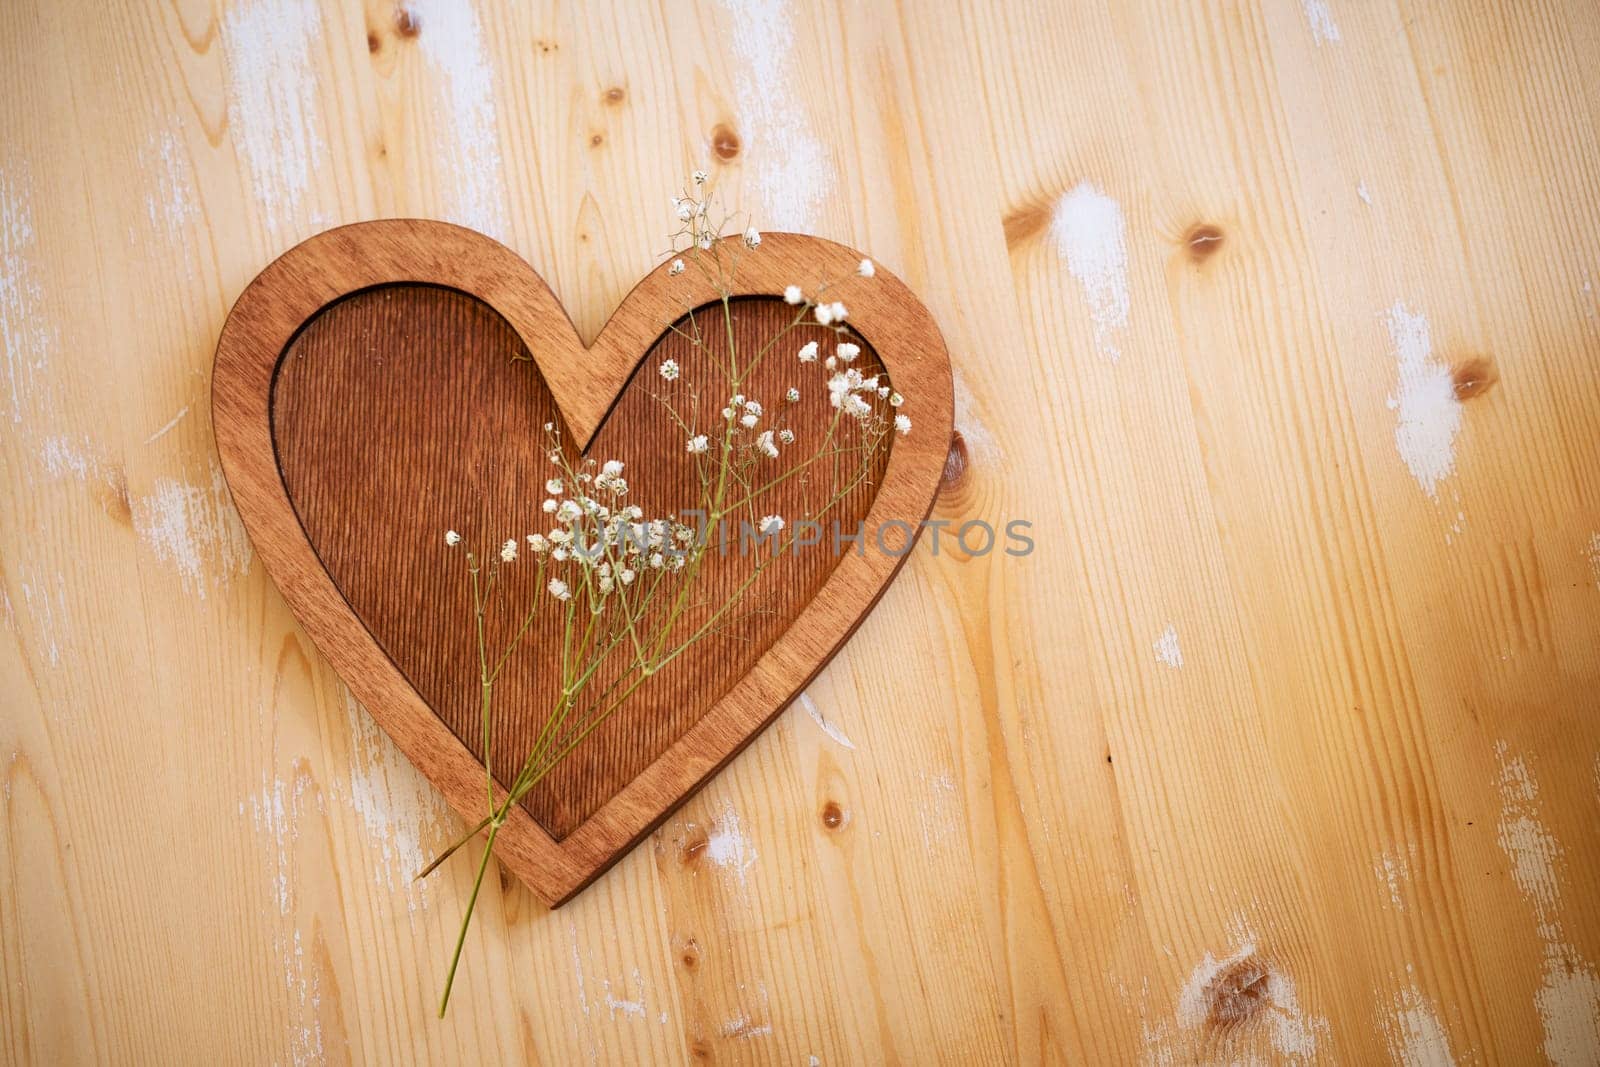 wooden heart with a sprig of small white flowers lies on a wooden background